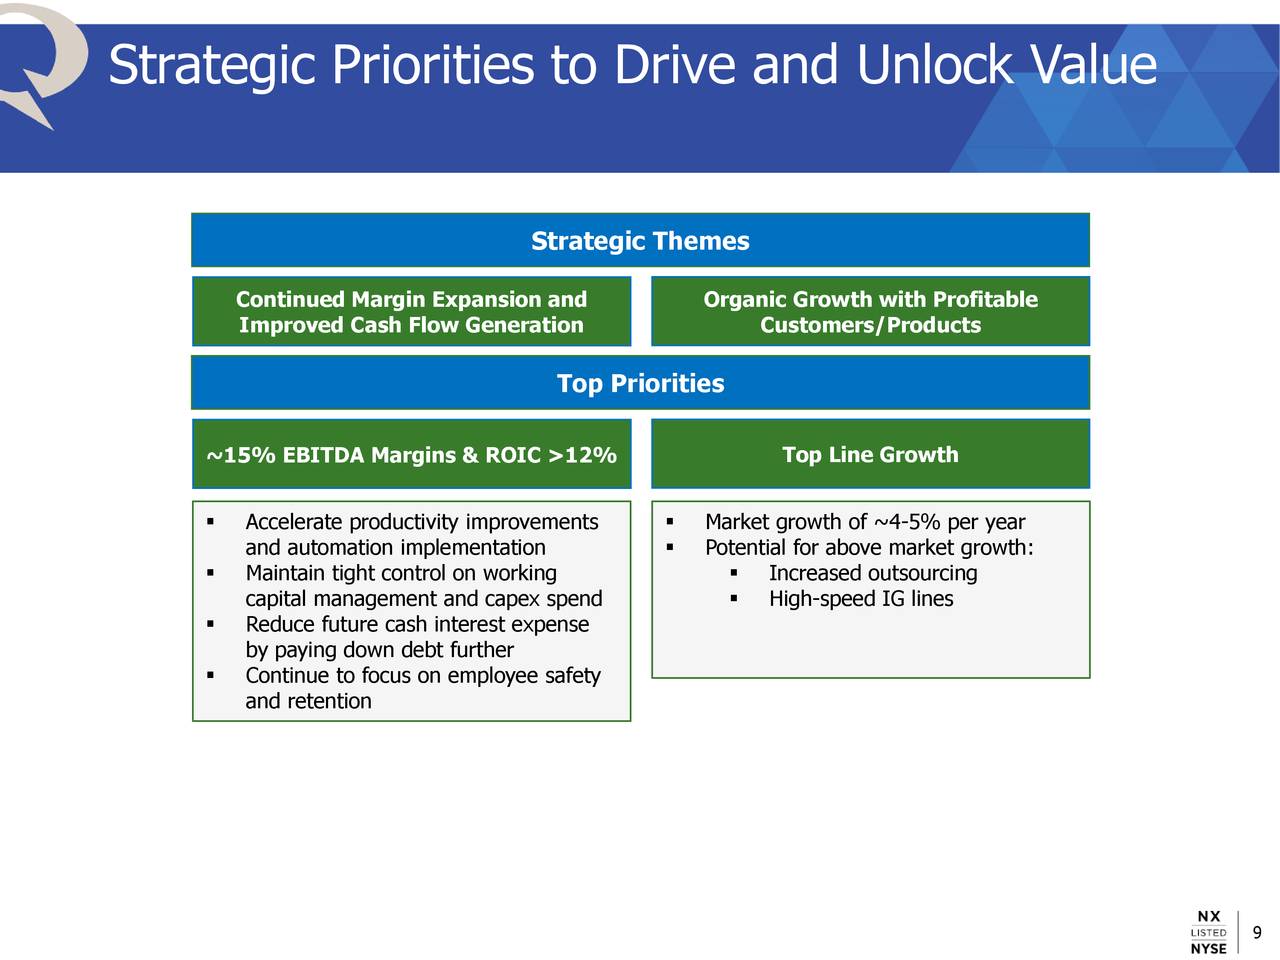 Strategic Priorities to Drive and Unlock Value